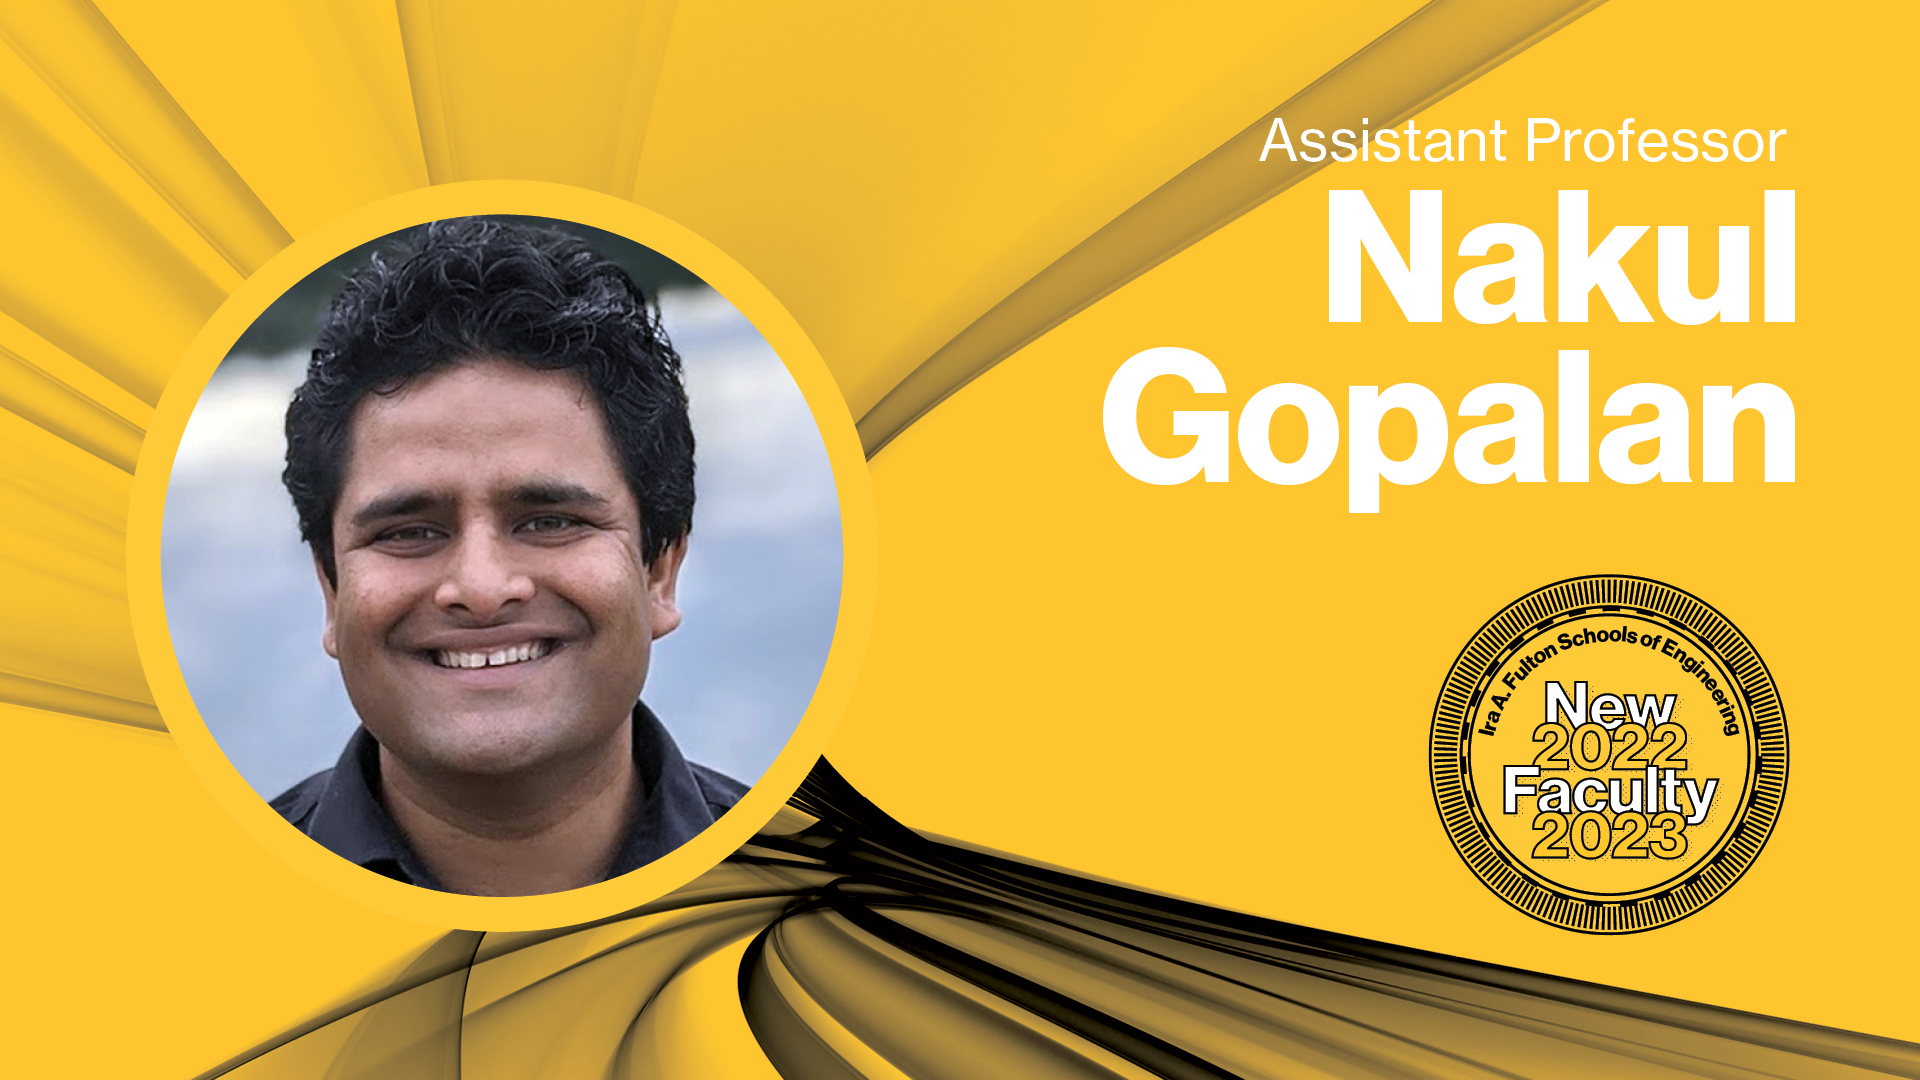 Assistant Professor Nakul Gopalan Ira A. Fulton Schools of Engineering New Faculty 2022-2023 with a headshot